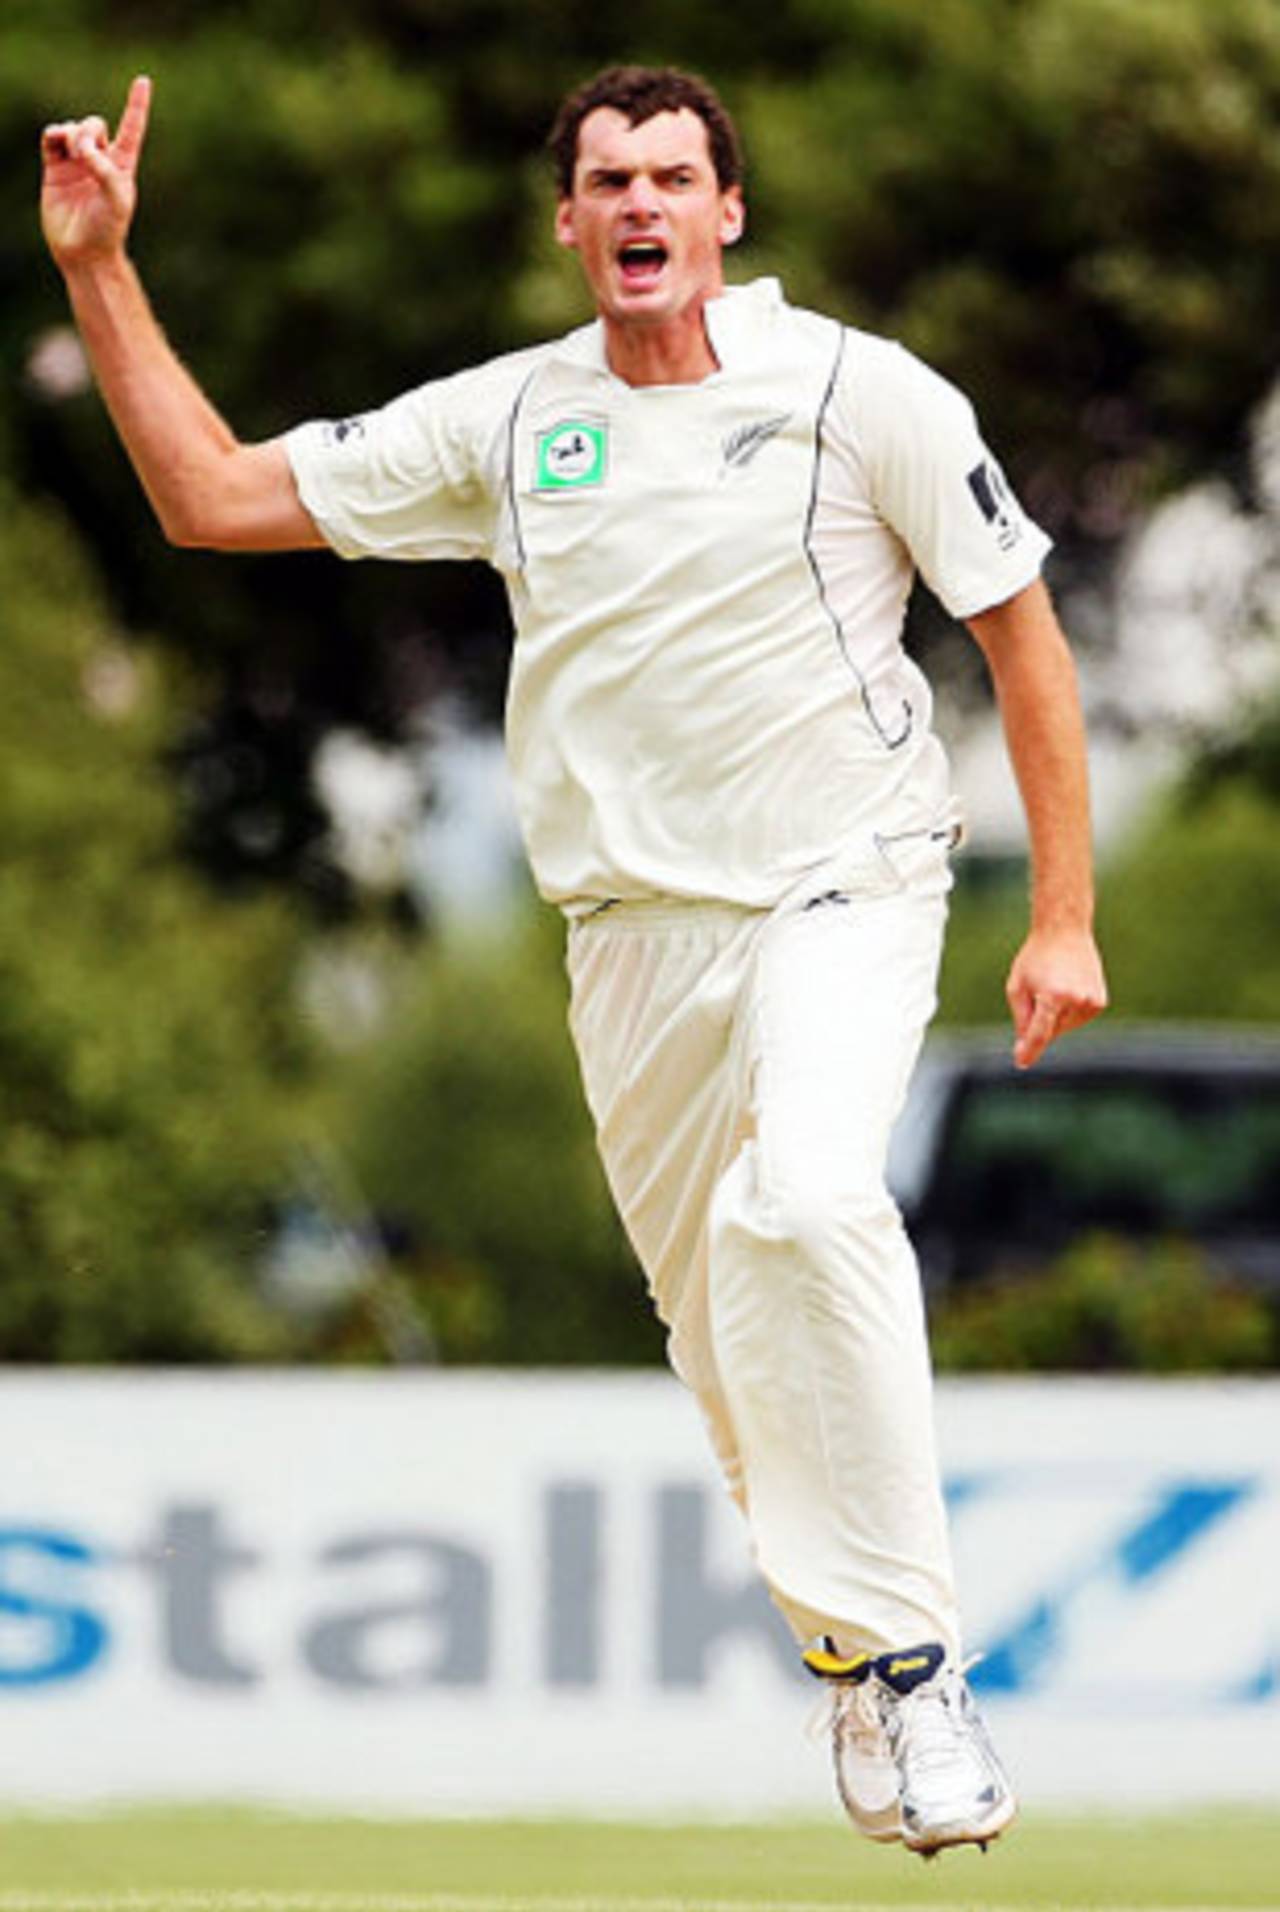 Kyle Mills celebrates one of his two wickets in the opening session, New Zealand v West Indies, 1st Test, Dunedin, 4th day, December 14, 2008